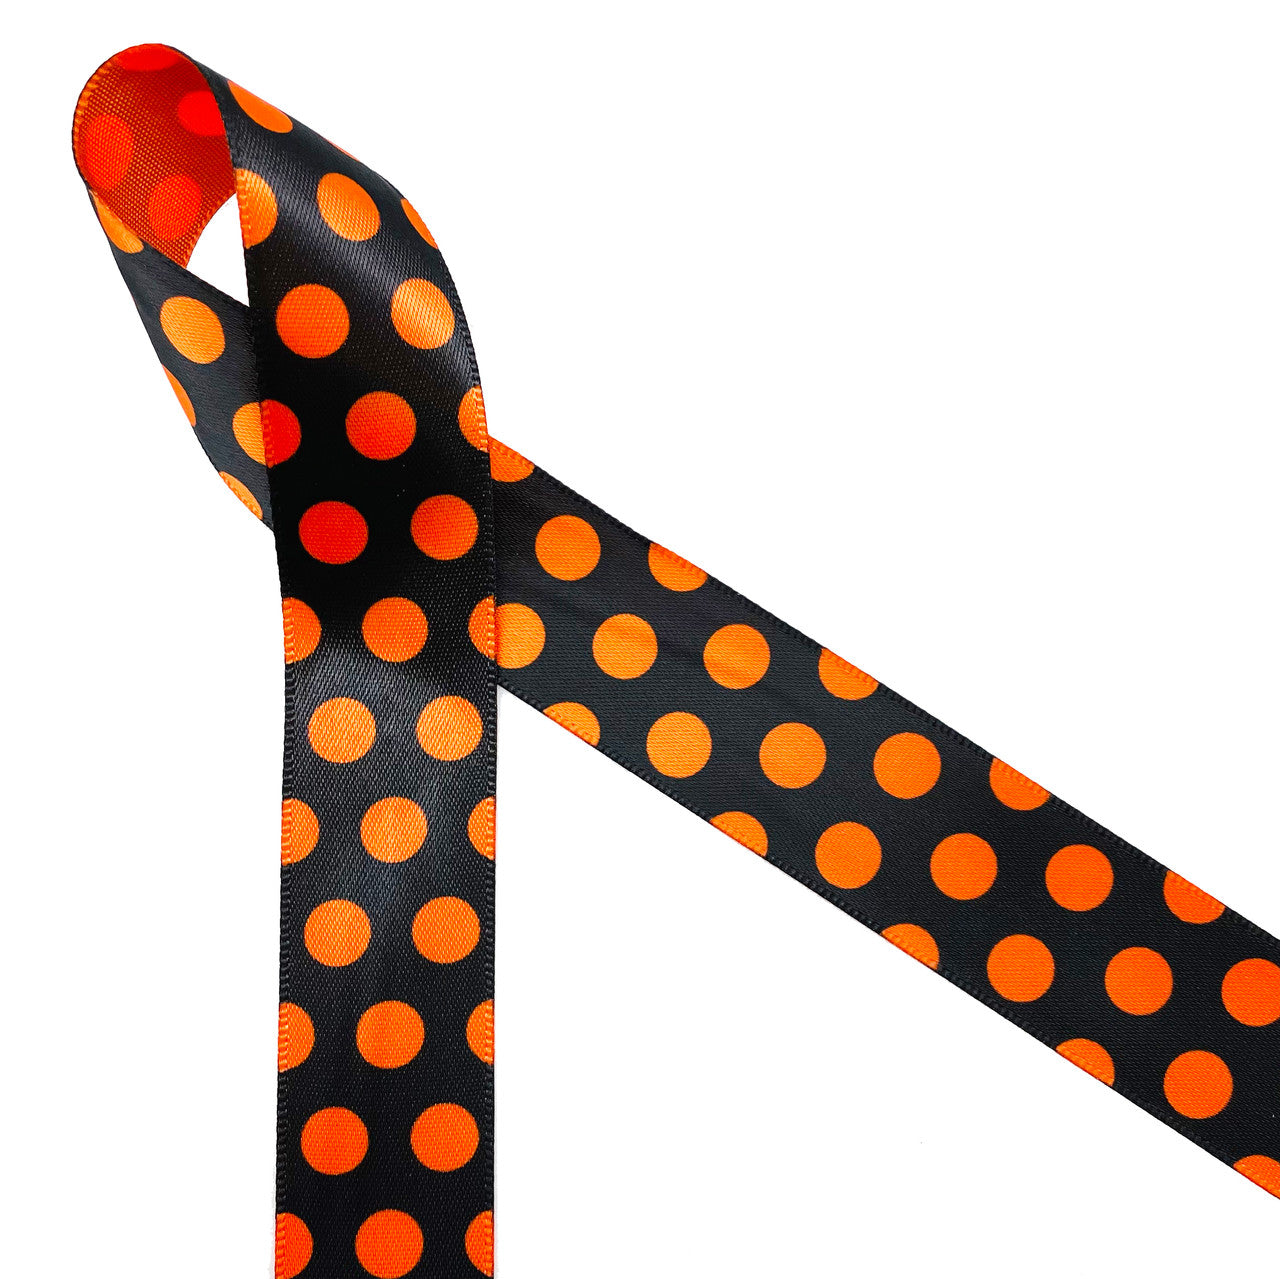 Nothing says Halloween like black and orange dots! Orange polka dots on a black background printed on 7/8" orange satin ribbon is a Halloween tradition. This Halloween classic design is ideal for party decor, party favors, gift wrap, gift baskets, treat bags, candy shops, bakeries, cookies and cake pops! This is a great design for Halloween crafts, wreaths, sewing and quilting projects. All our ribbon is designed and printed in the USA